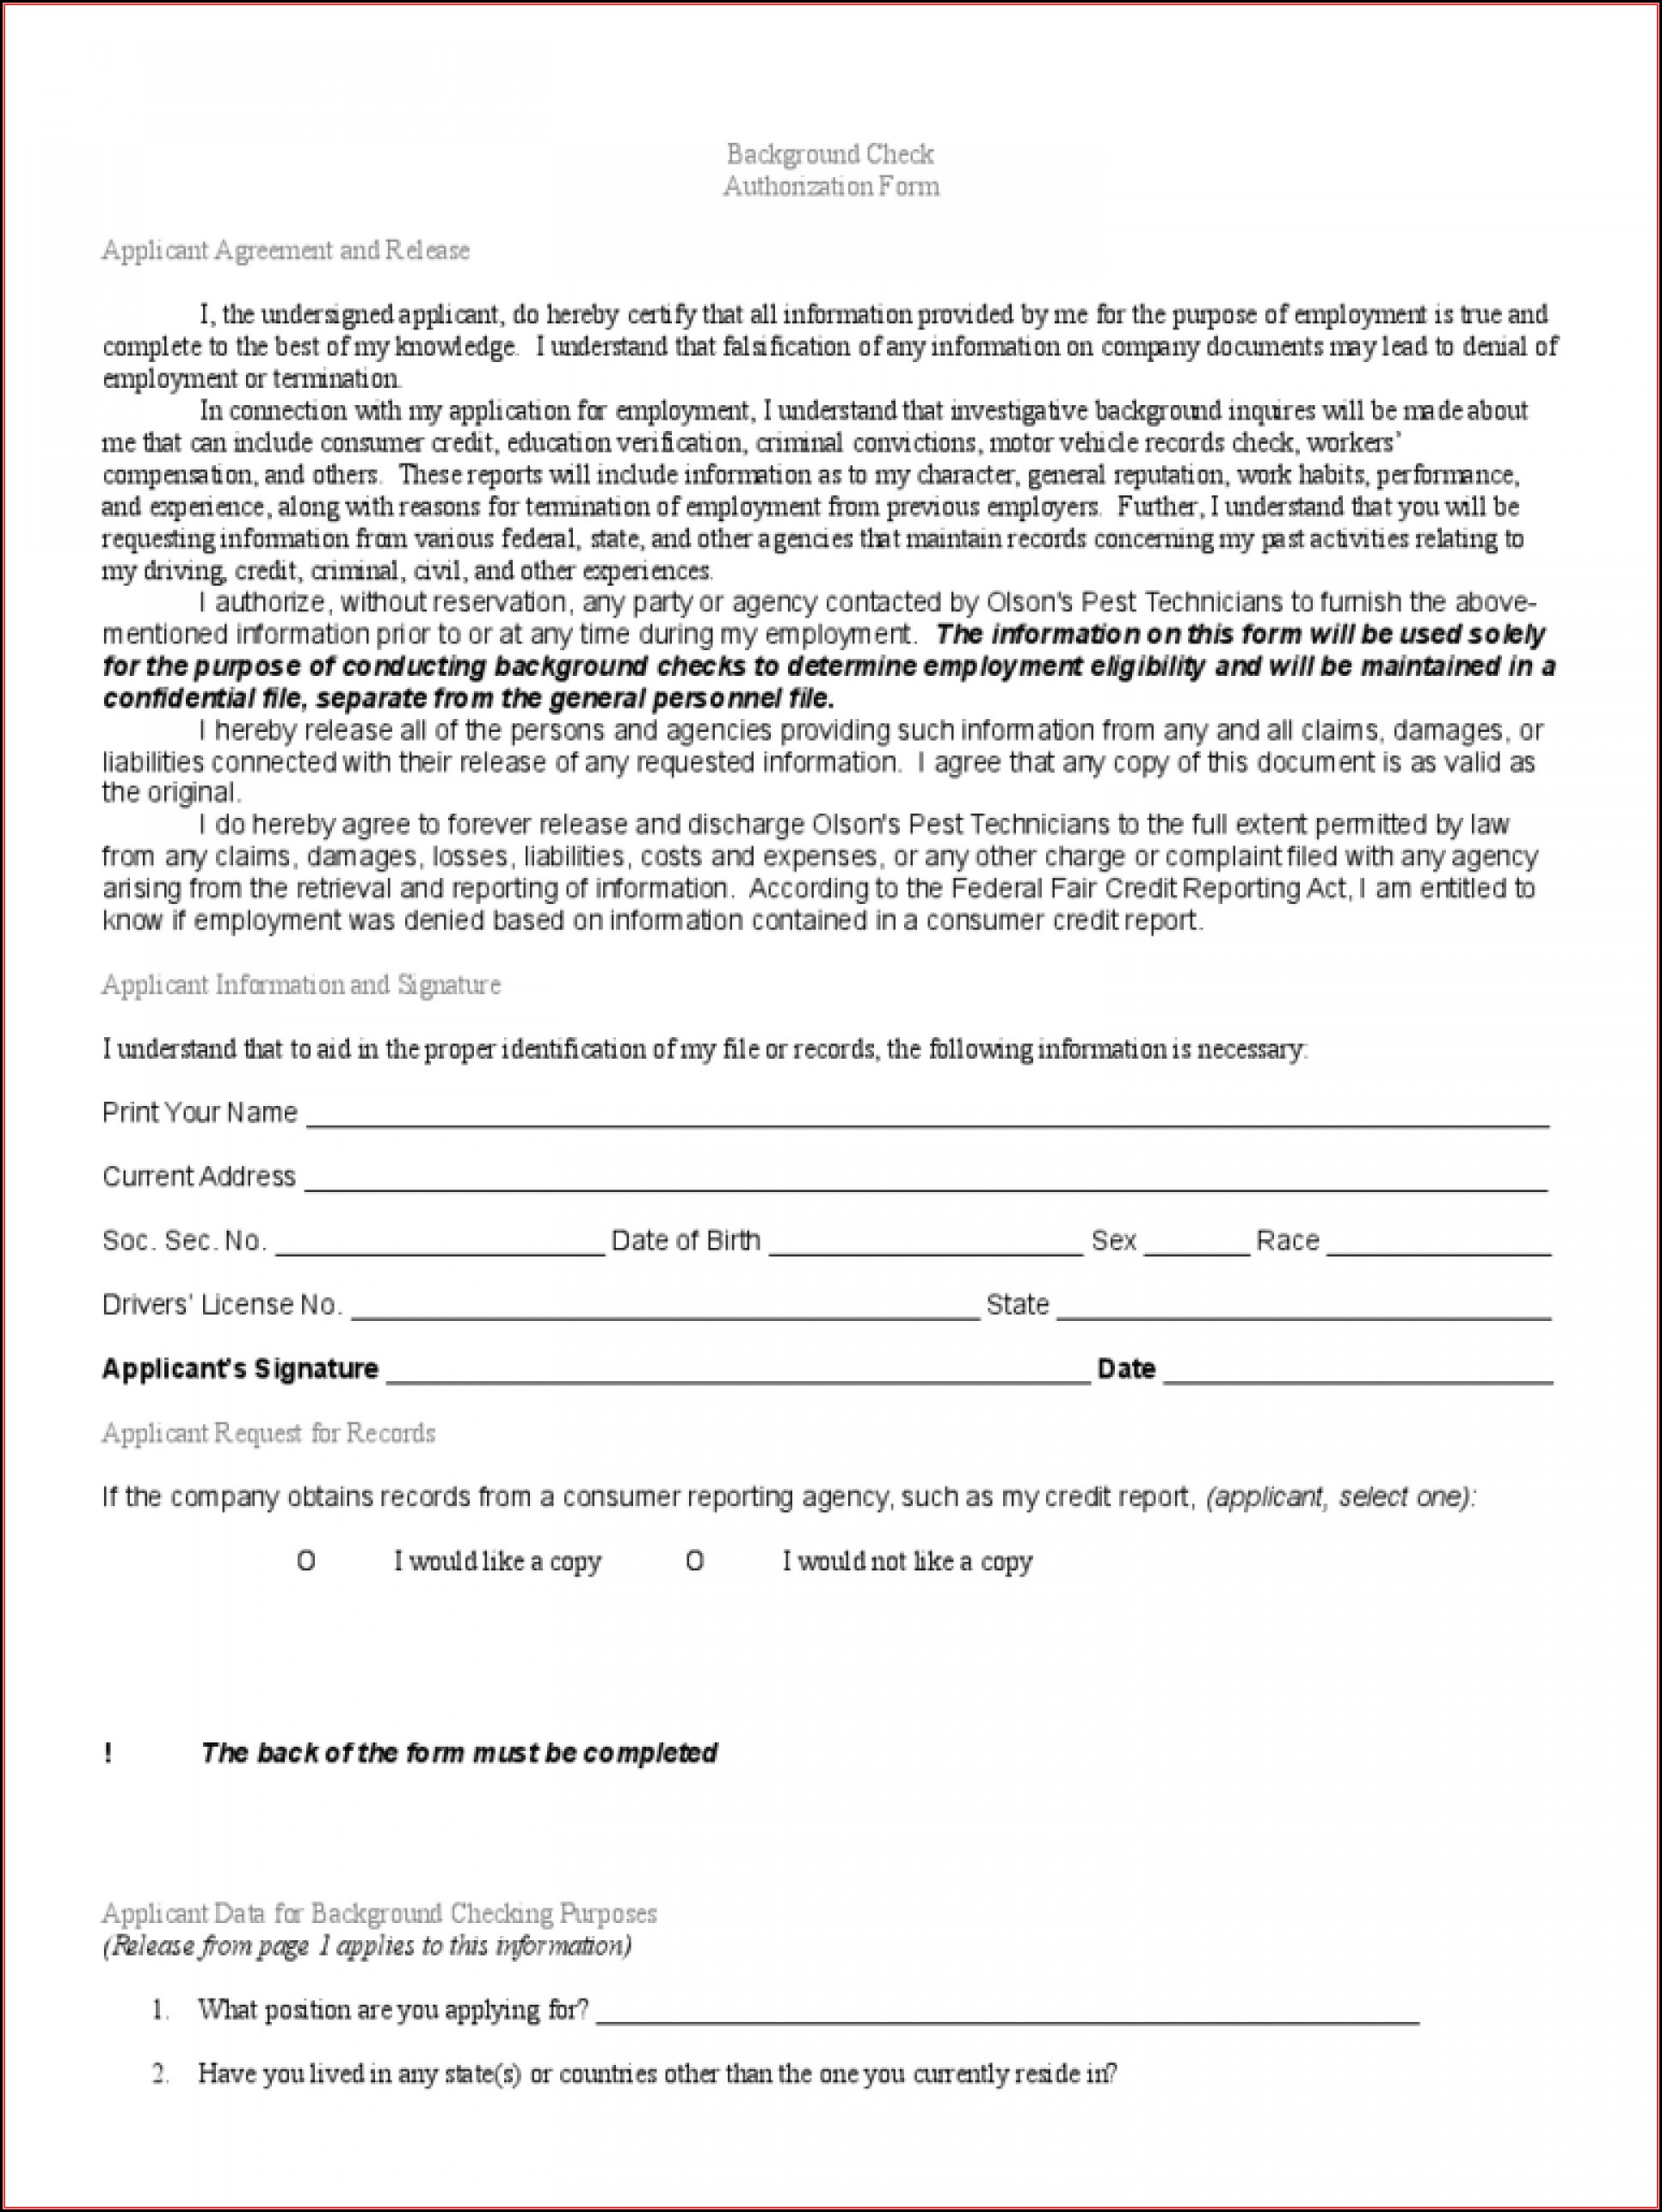 Free Criminal Background Check Authorization Form Template